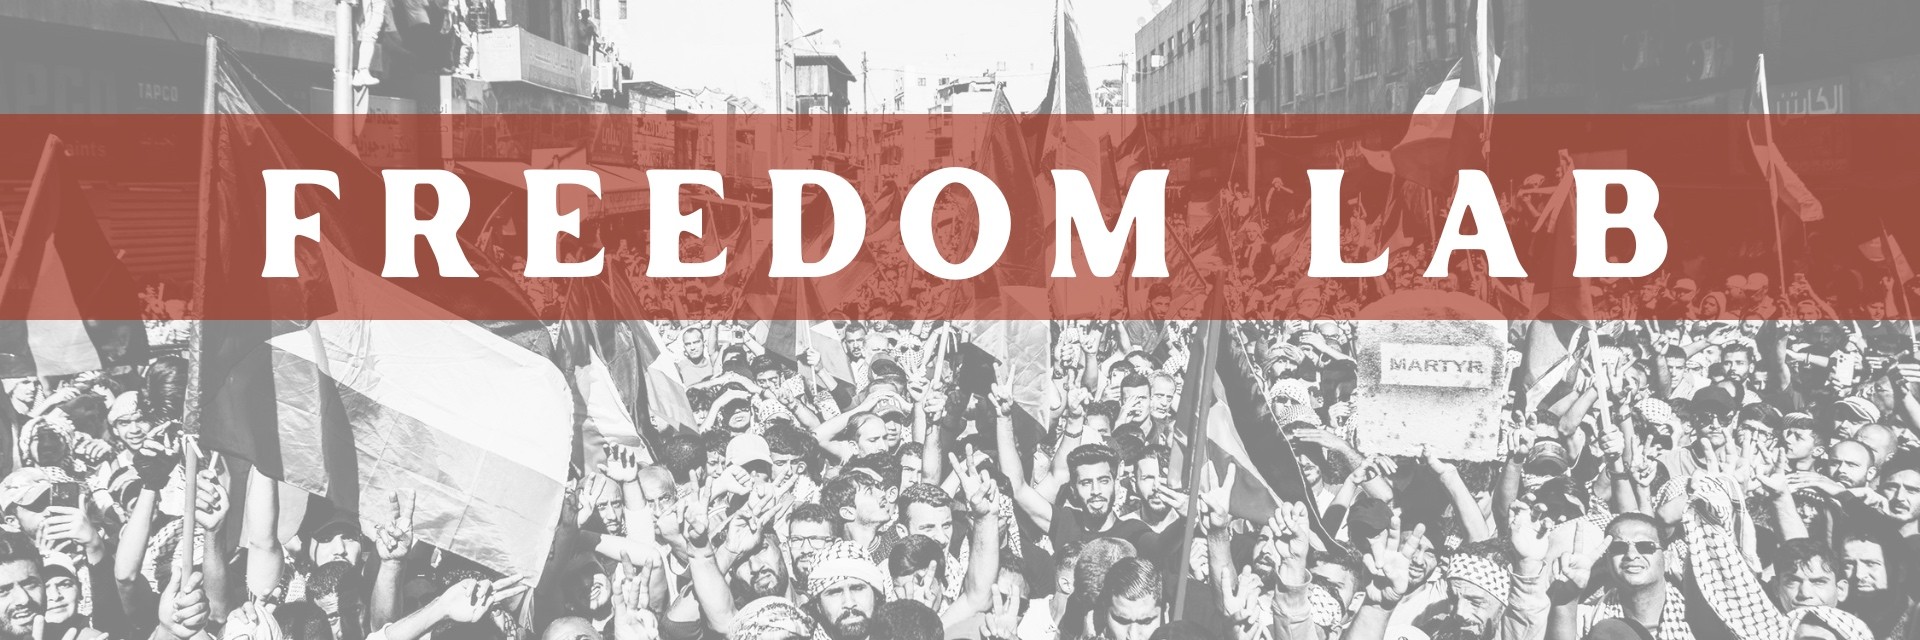 FREEDOM Lab Banner_top_smaller size